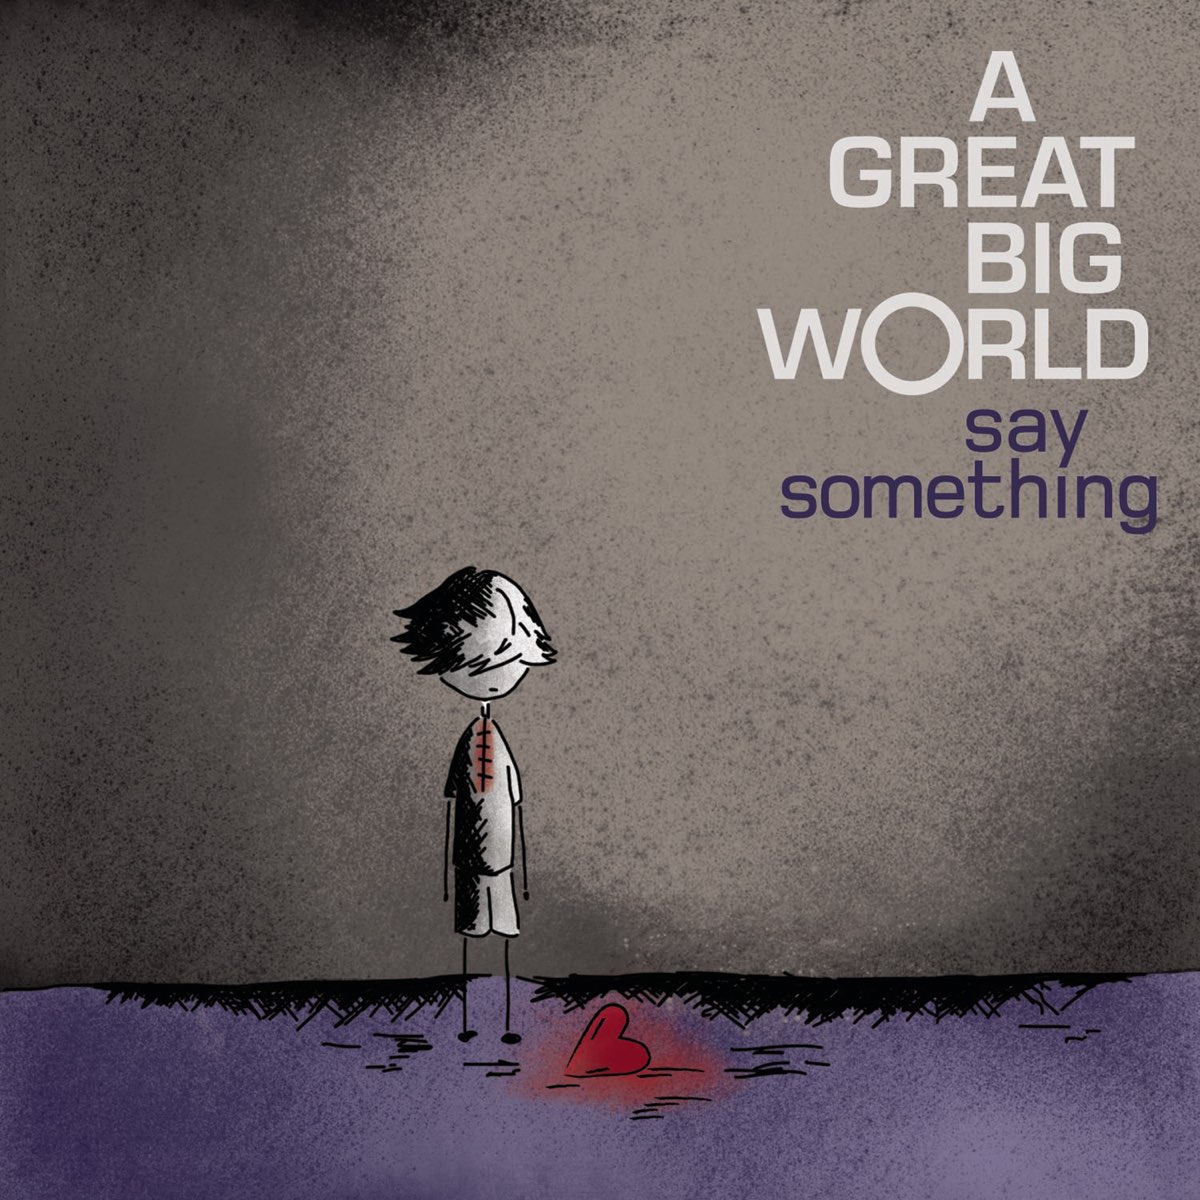 This big world. Say something a great big World. A great big World Christina Aguilera. Say something i'm giving.